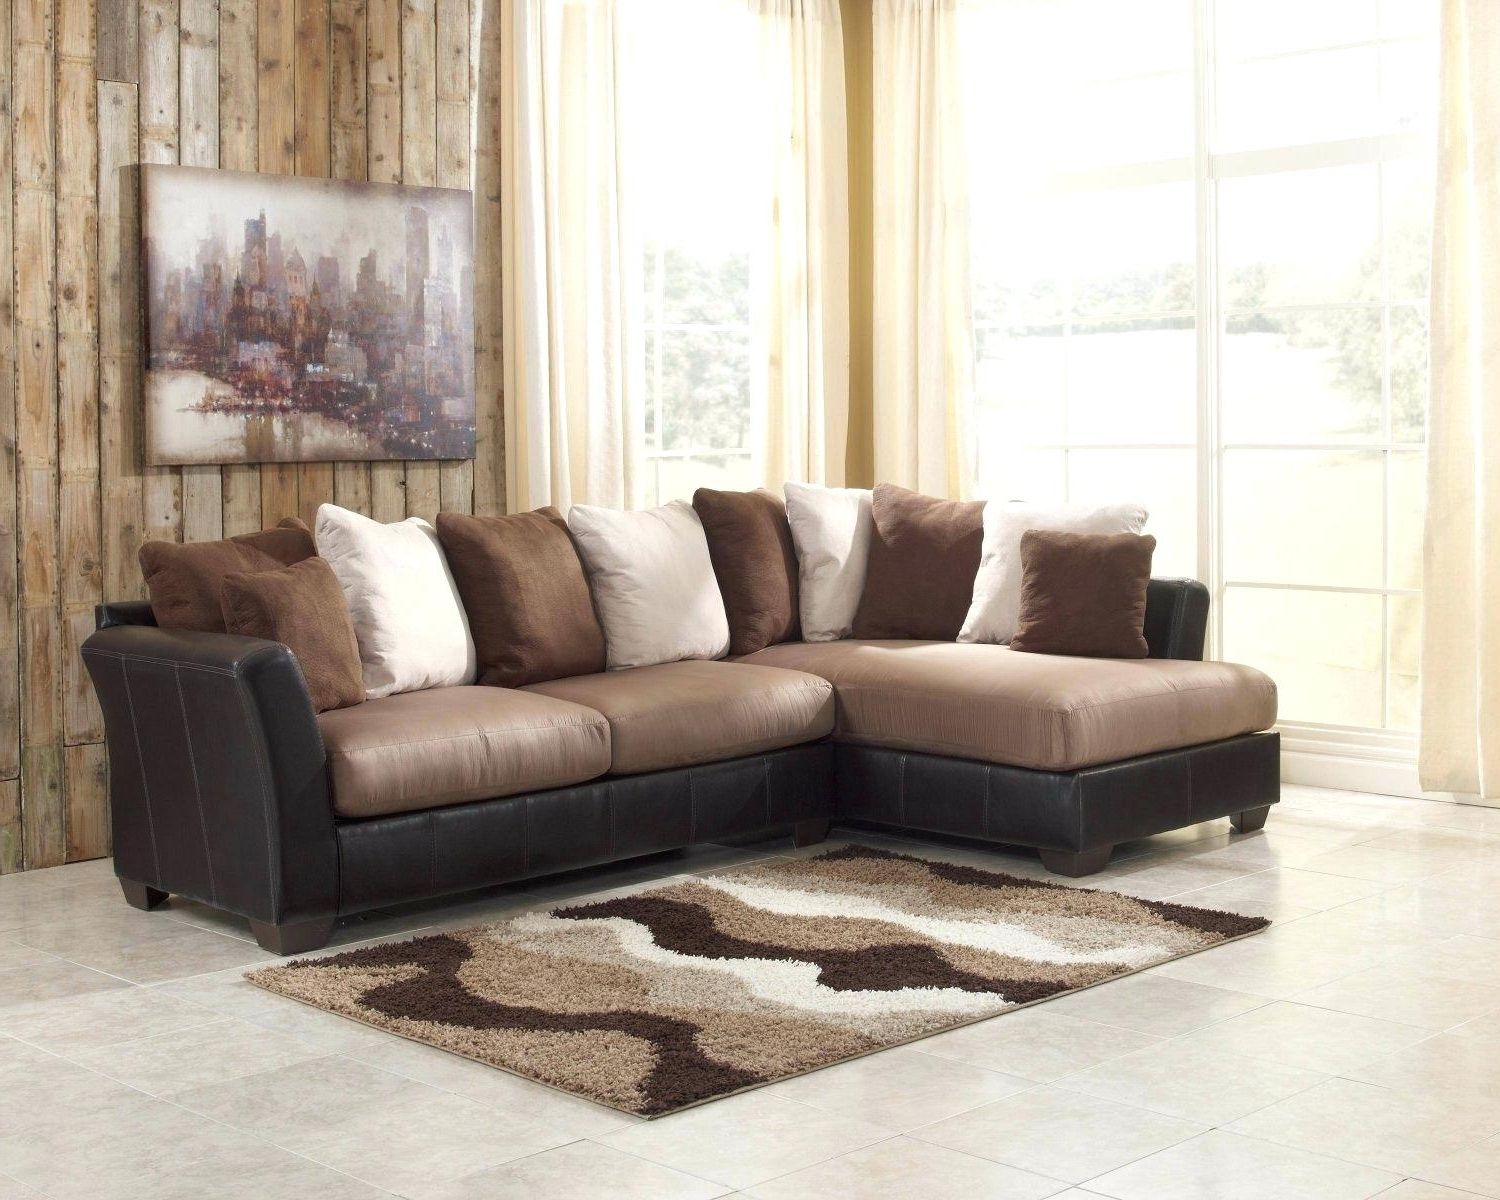 West Elm Sectional Sofas Throughout Latest West Elm Sectionals S Small Leather Sectional Sofas Sale (View 3 of 15)